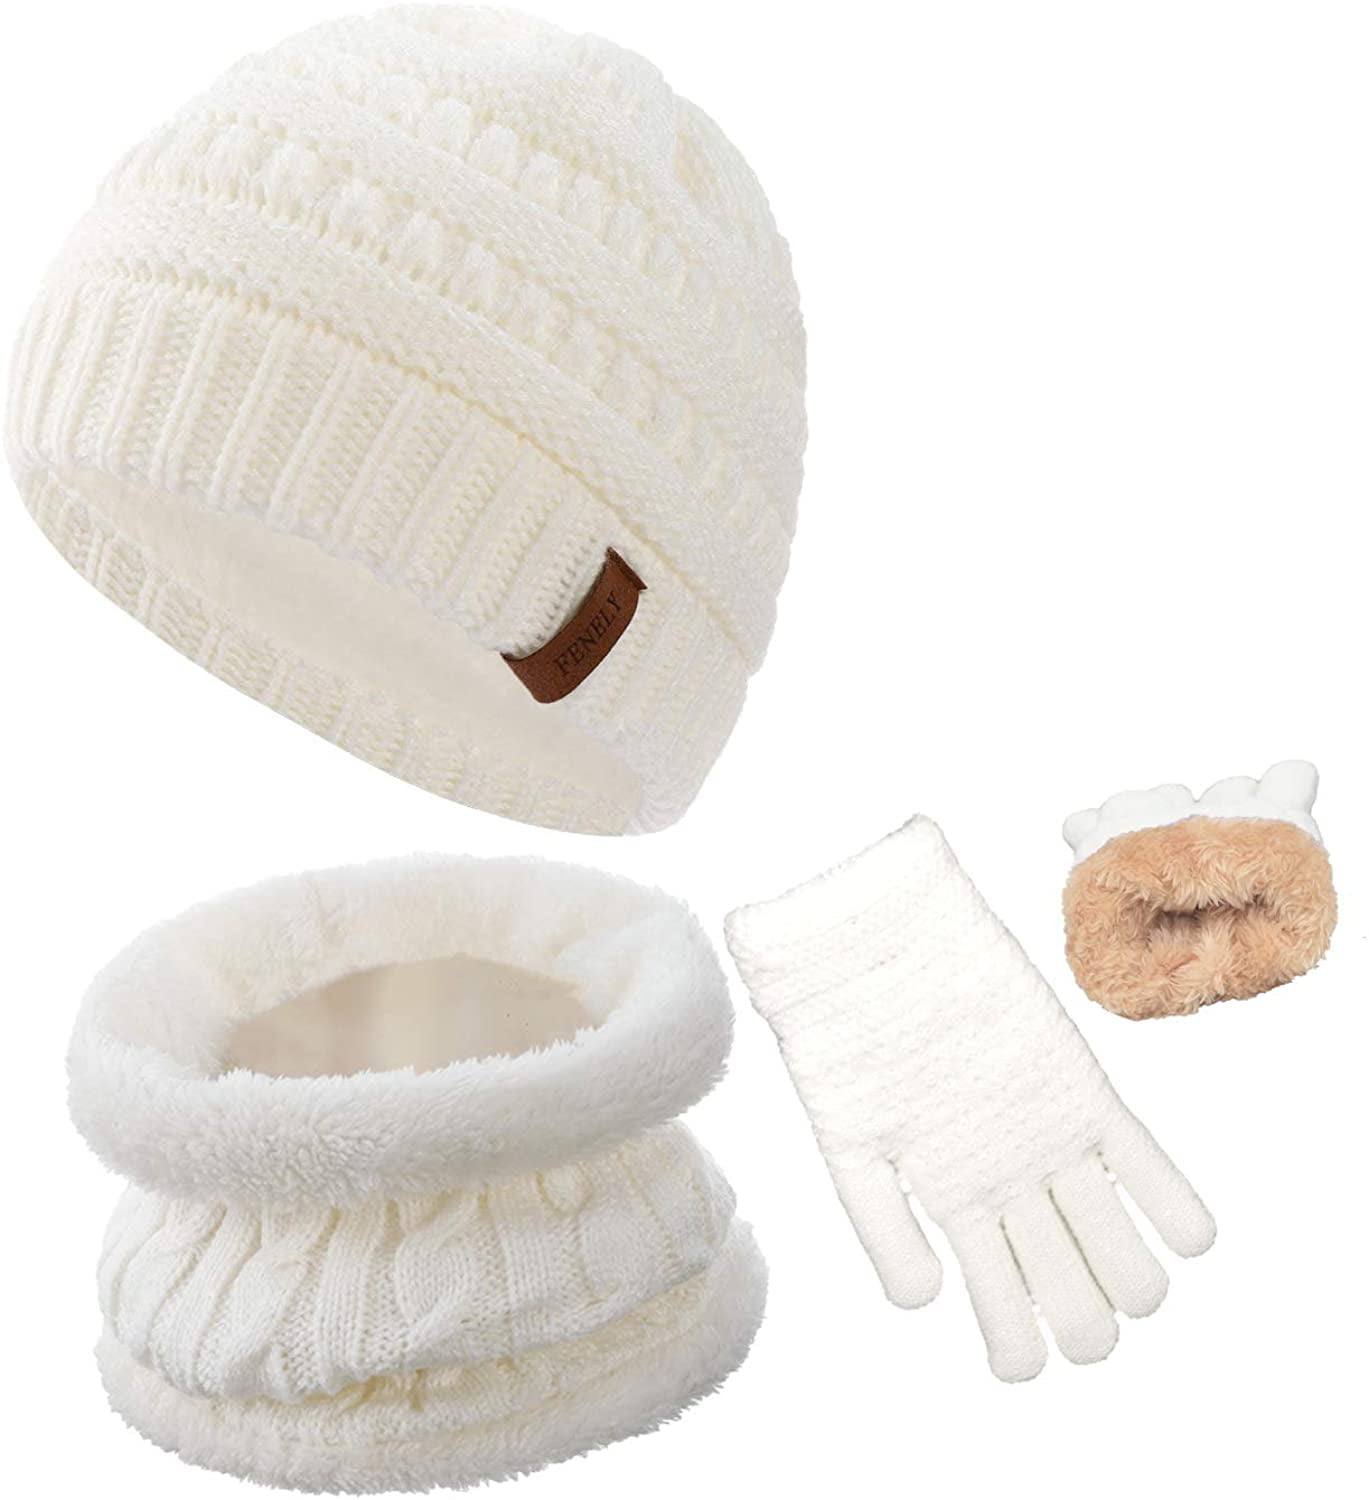 Winter Kids Pom Beanie Hat and Mittens Gloves Set Warm Fleece Lined for Toddler Boy Girl Age 2-5 